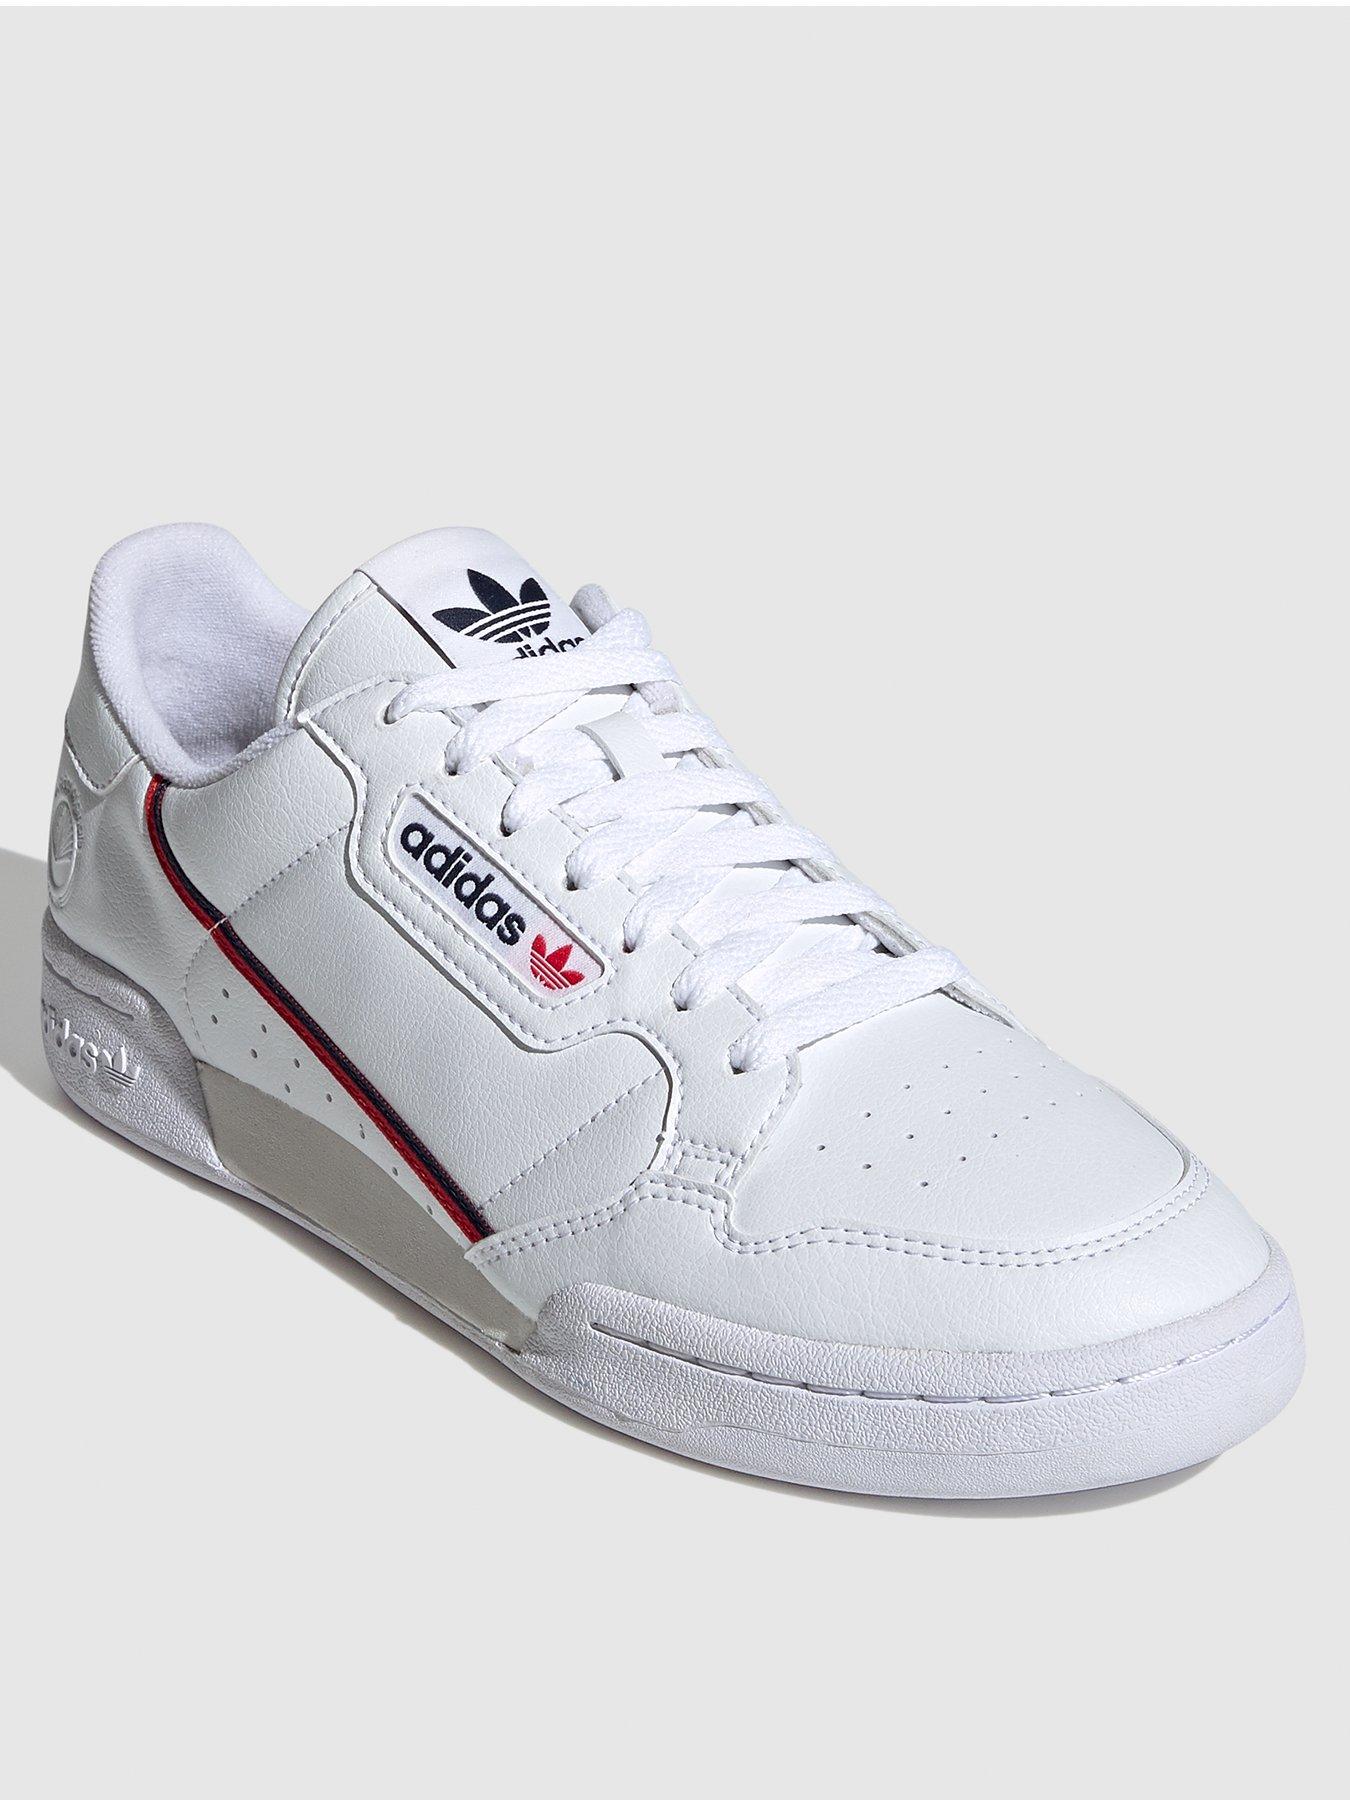 adidas continental 80 white size 6